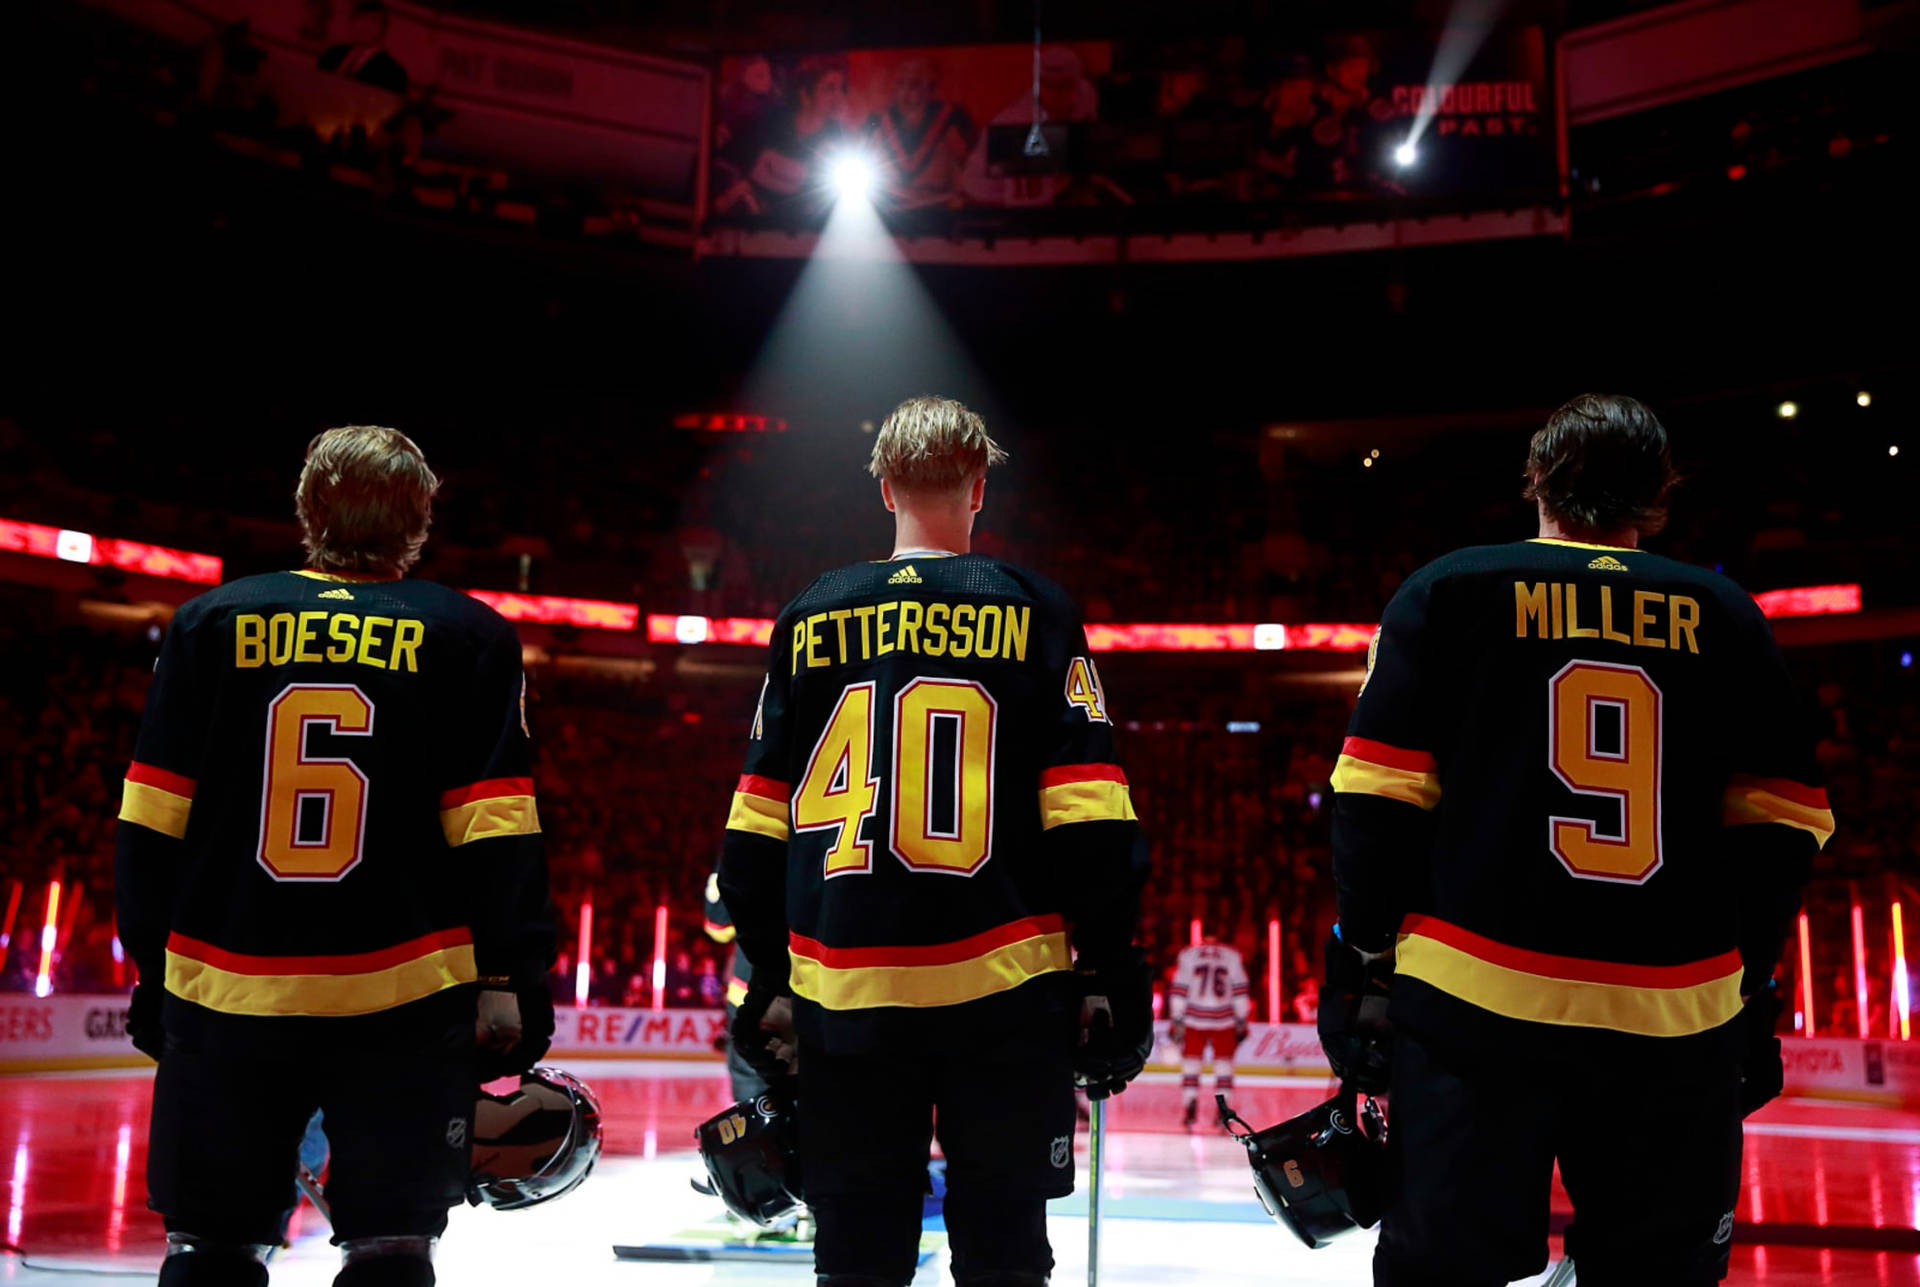 Elias Pettersson With Boeser And Miller Canucks Teammates Background